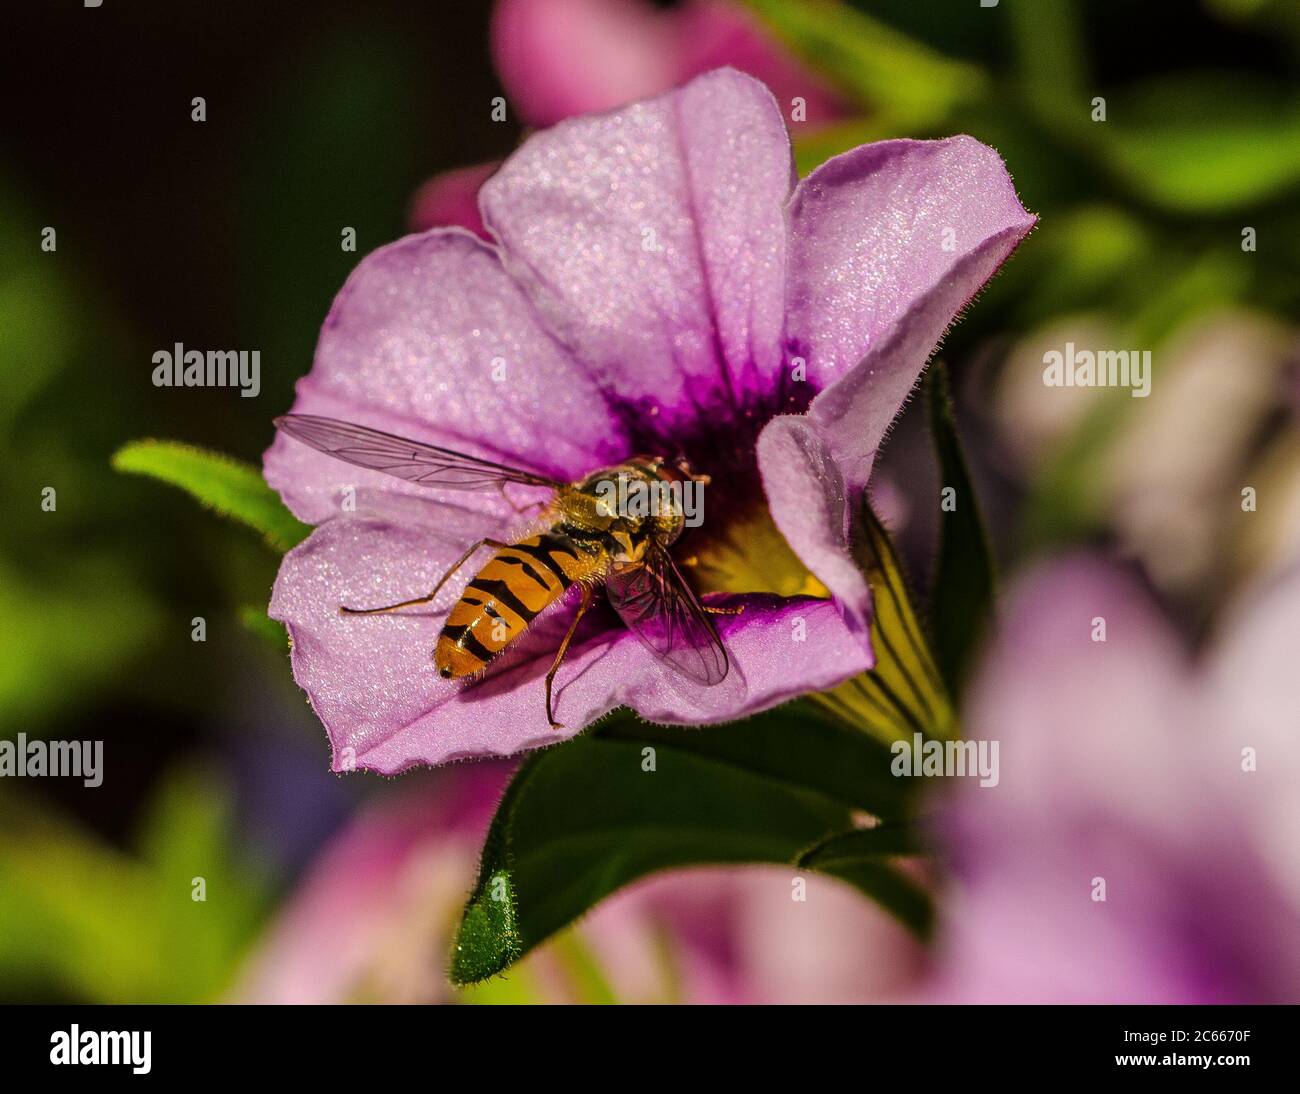 Hoverflies are of the insect family Syrphidae. As their common name suggests, they are often seen hovering or nectaring at flowers. Stock Photo